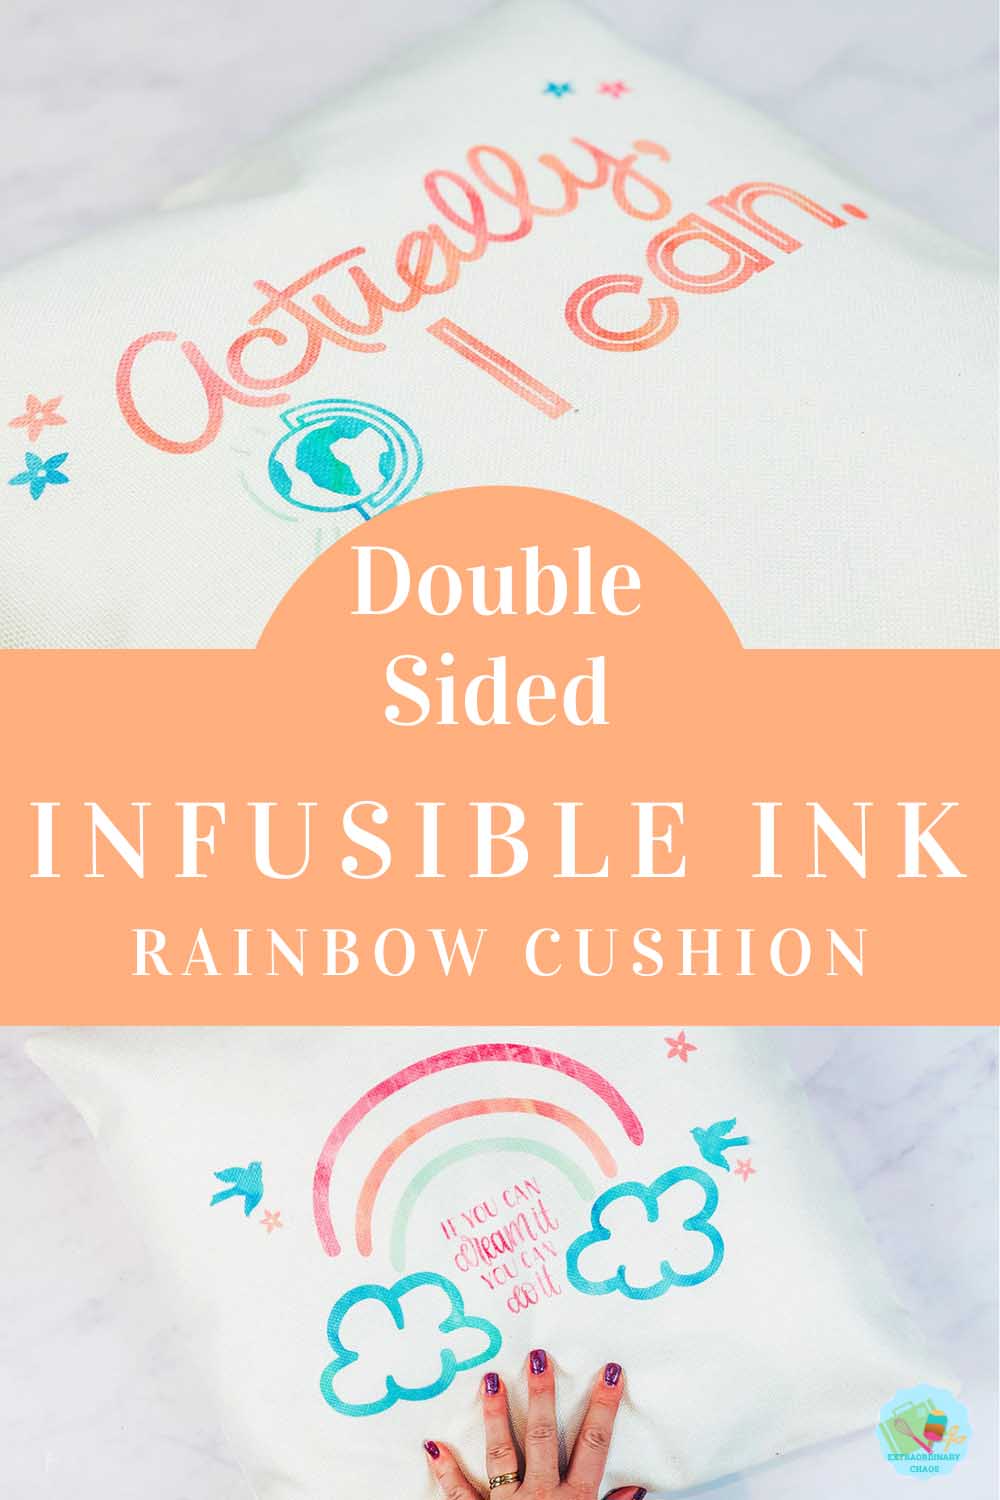 Double Sided Infusible Ink Rainbow Cushion